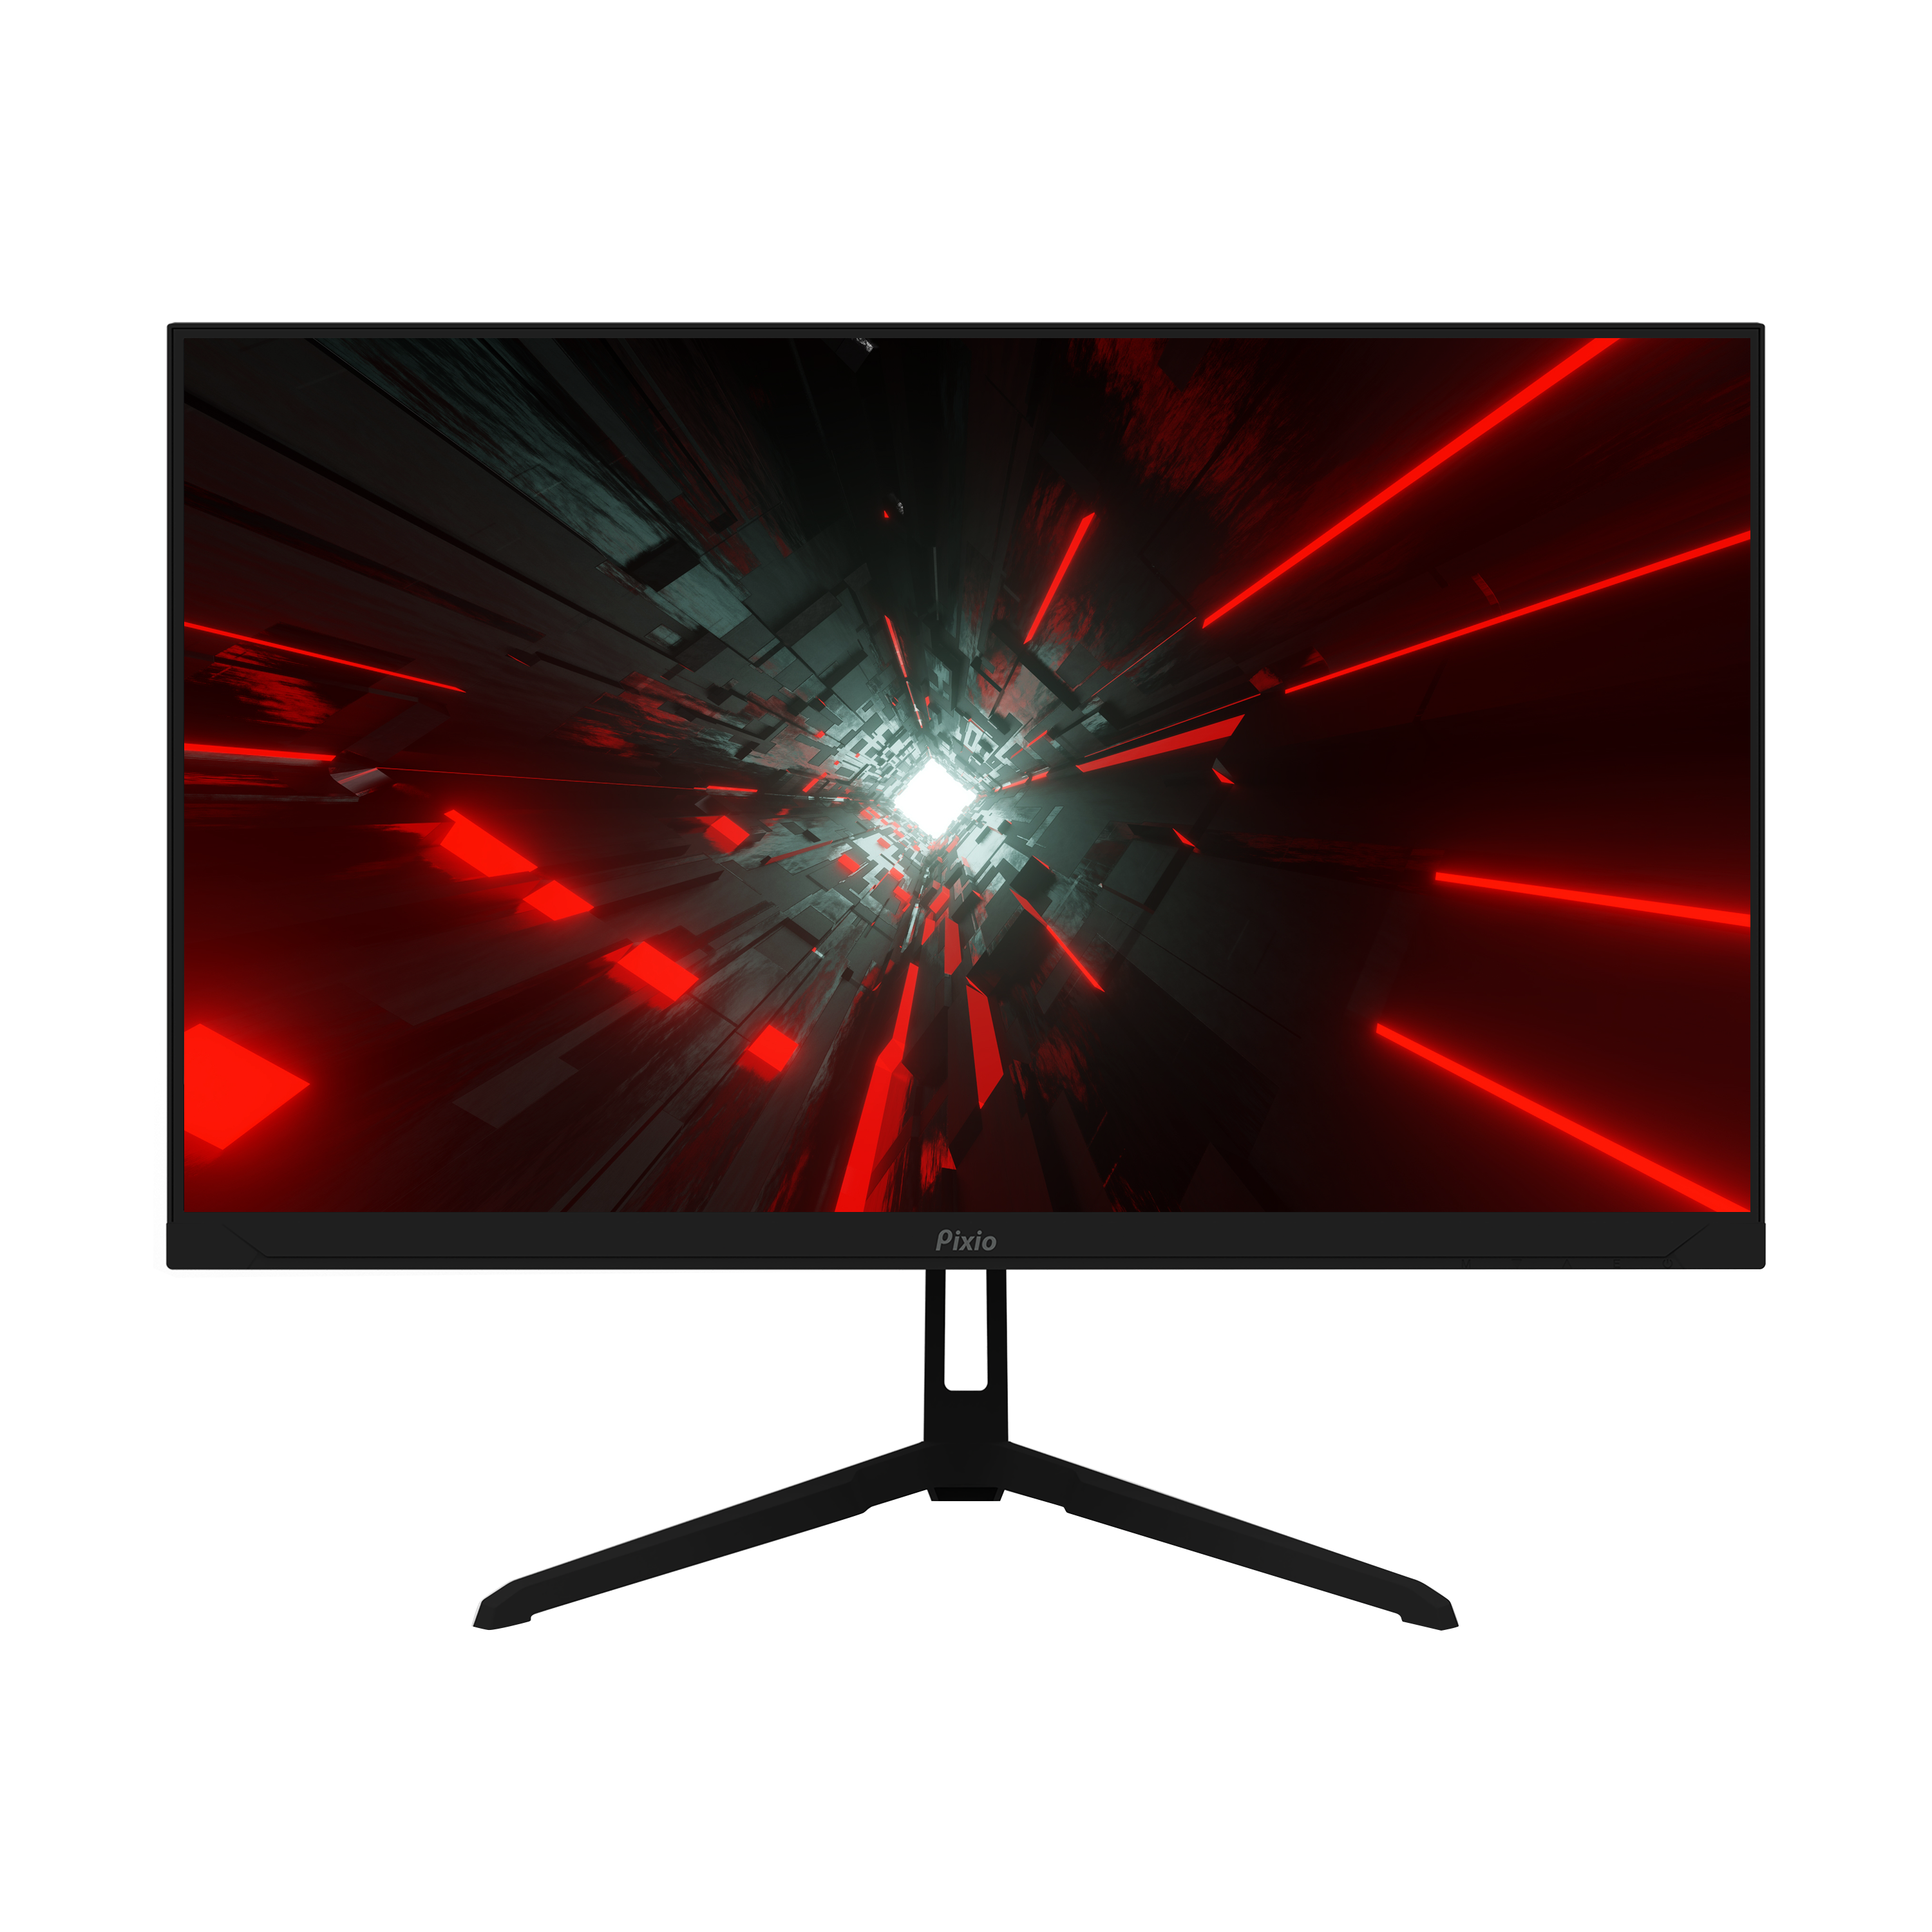 Pixio PX278 Wave Gaming Monitor